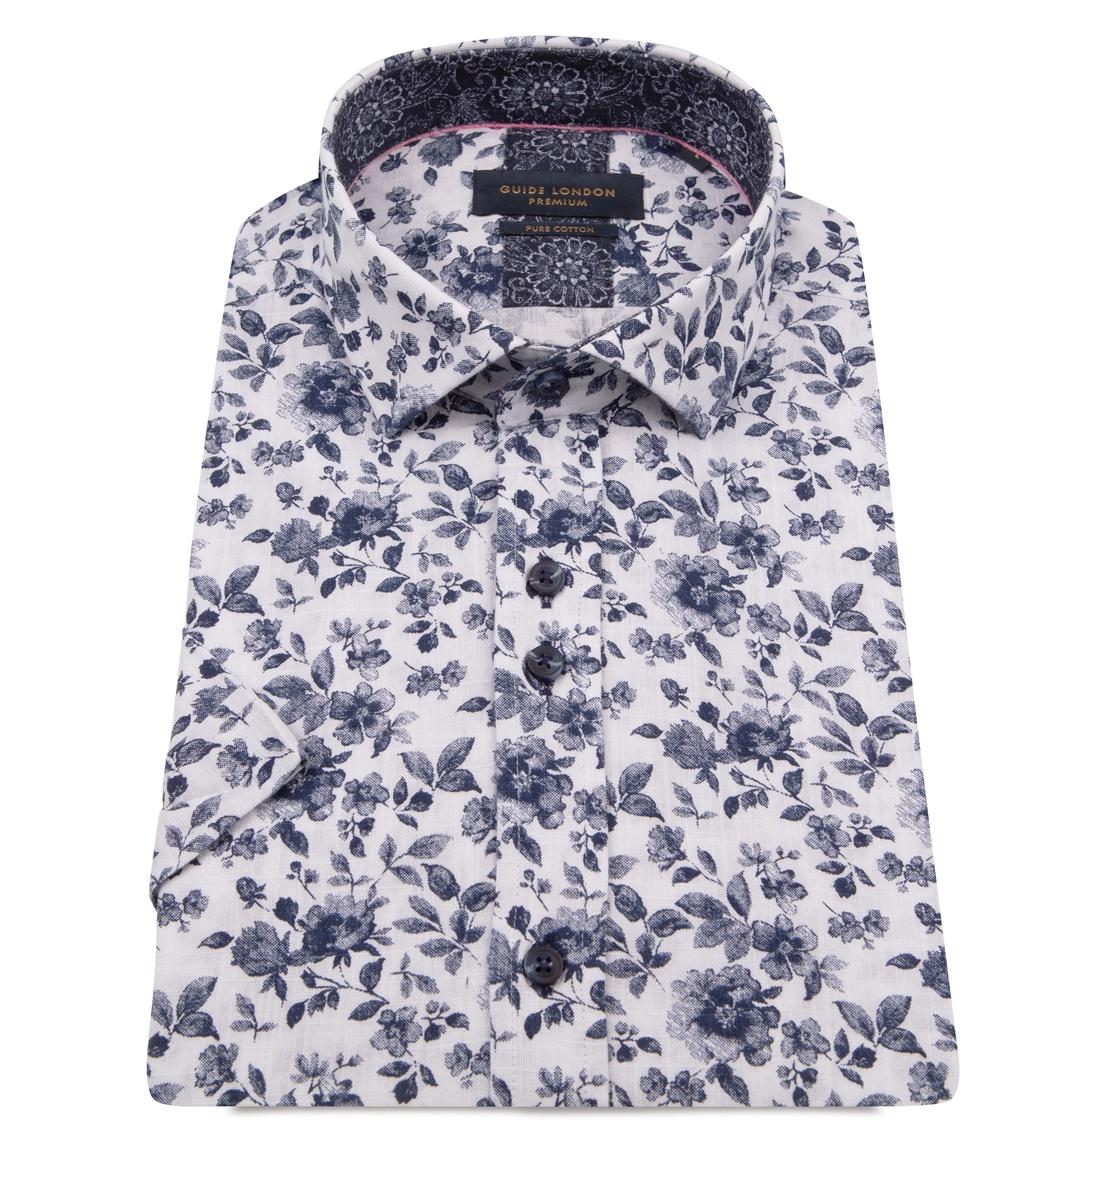 GUIDE LONDON BLUE WITH LARGE FLORAL PRINT SHIRT